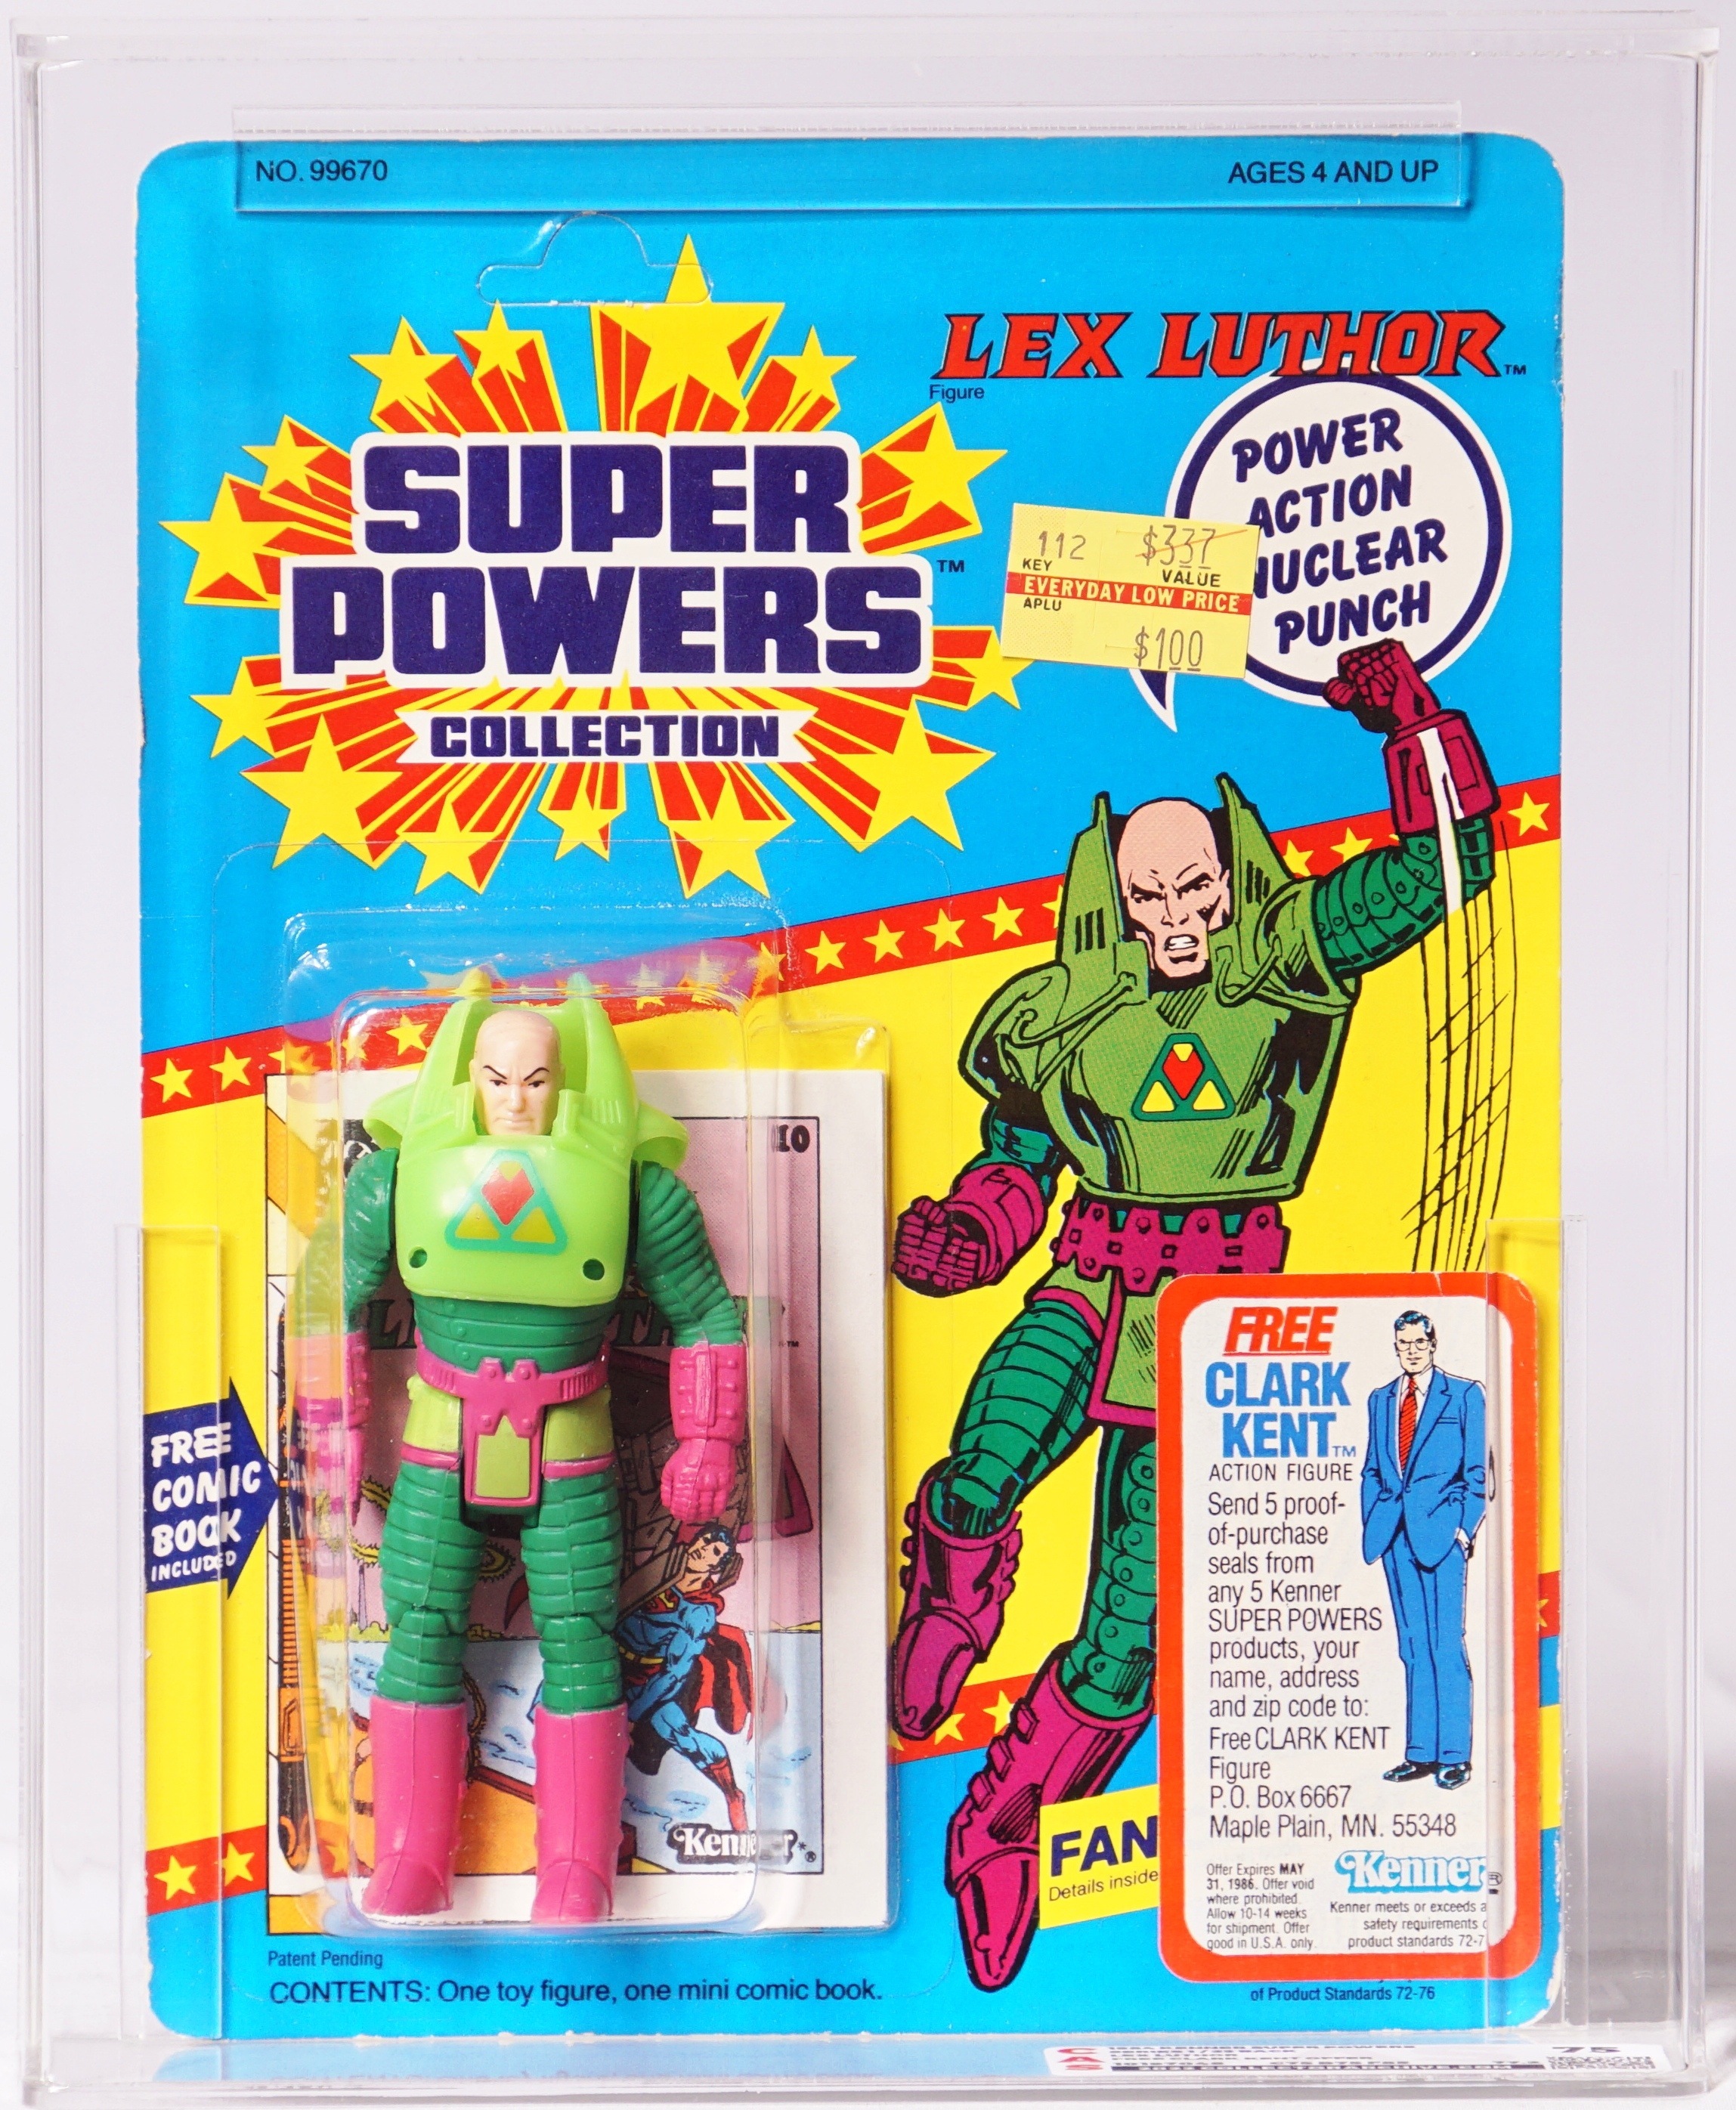 1984 Kenner Super Powers Carded Action Figure - Lex Luthor